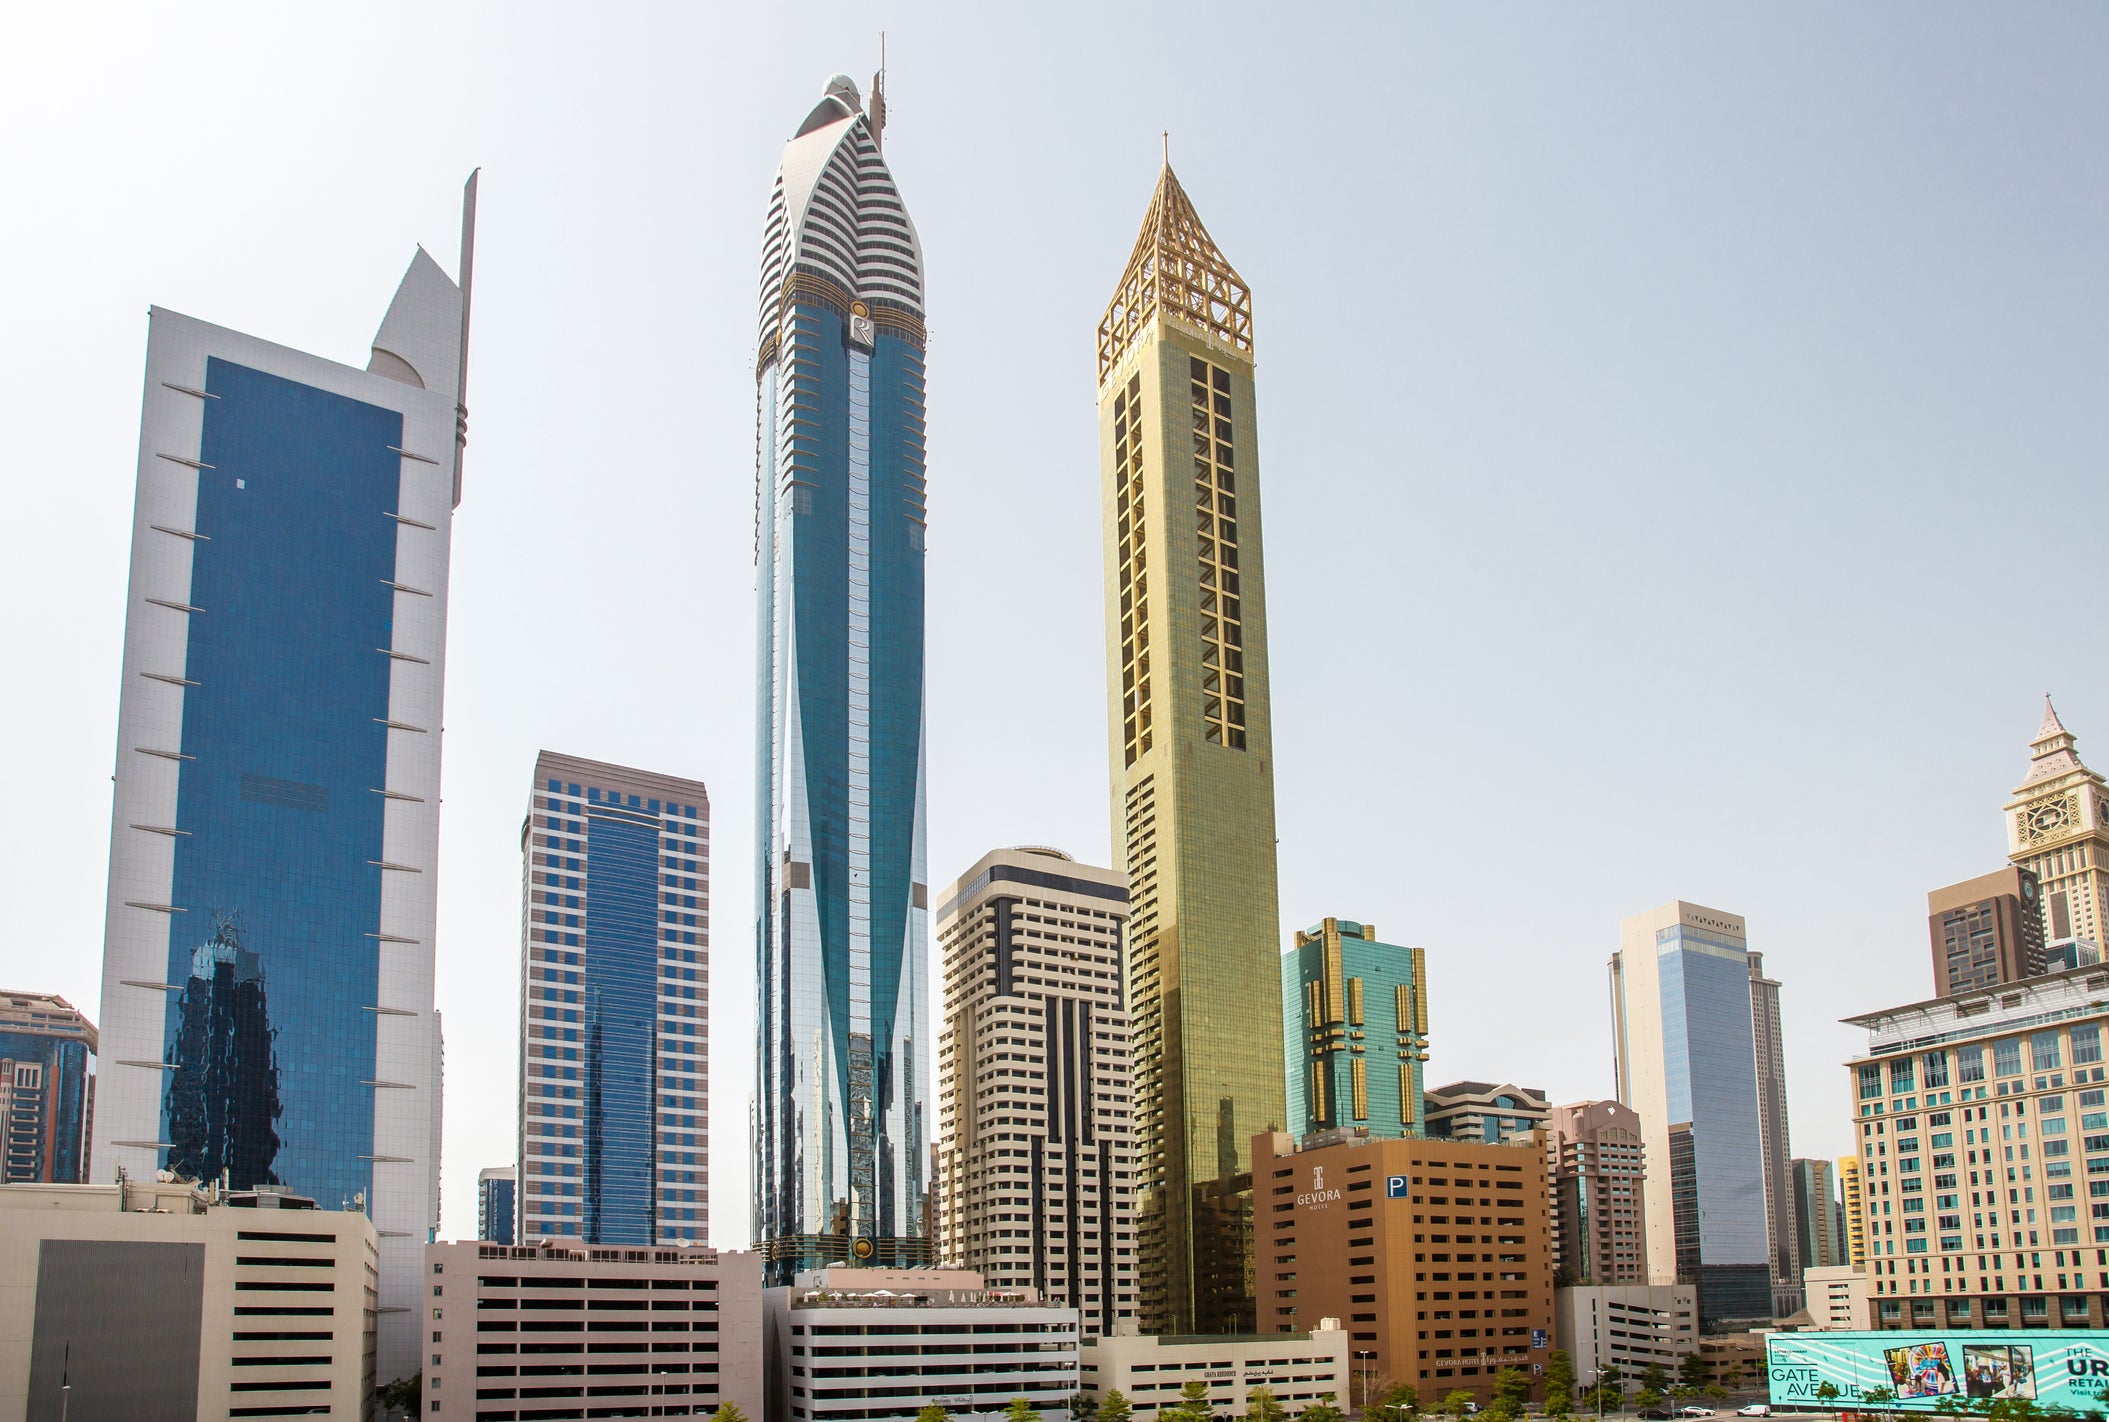 Dubai, UAE - April 17, 2022: skyscrapers on Sheikh Zayed Road - Gevora, Rose Rayhaan, 21st Century Tower, from behind.